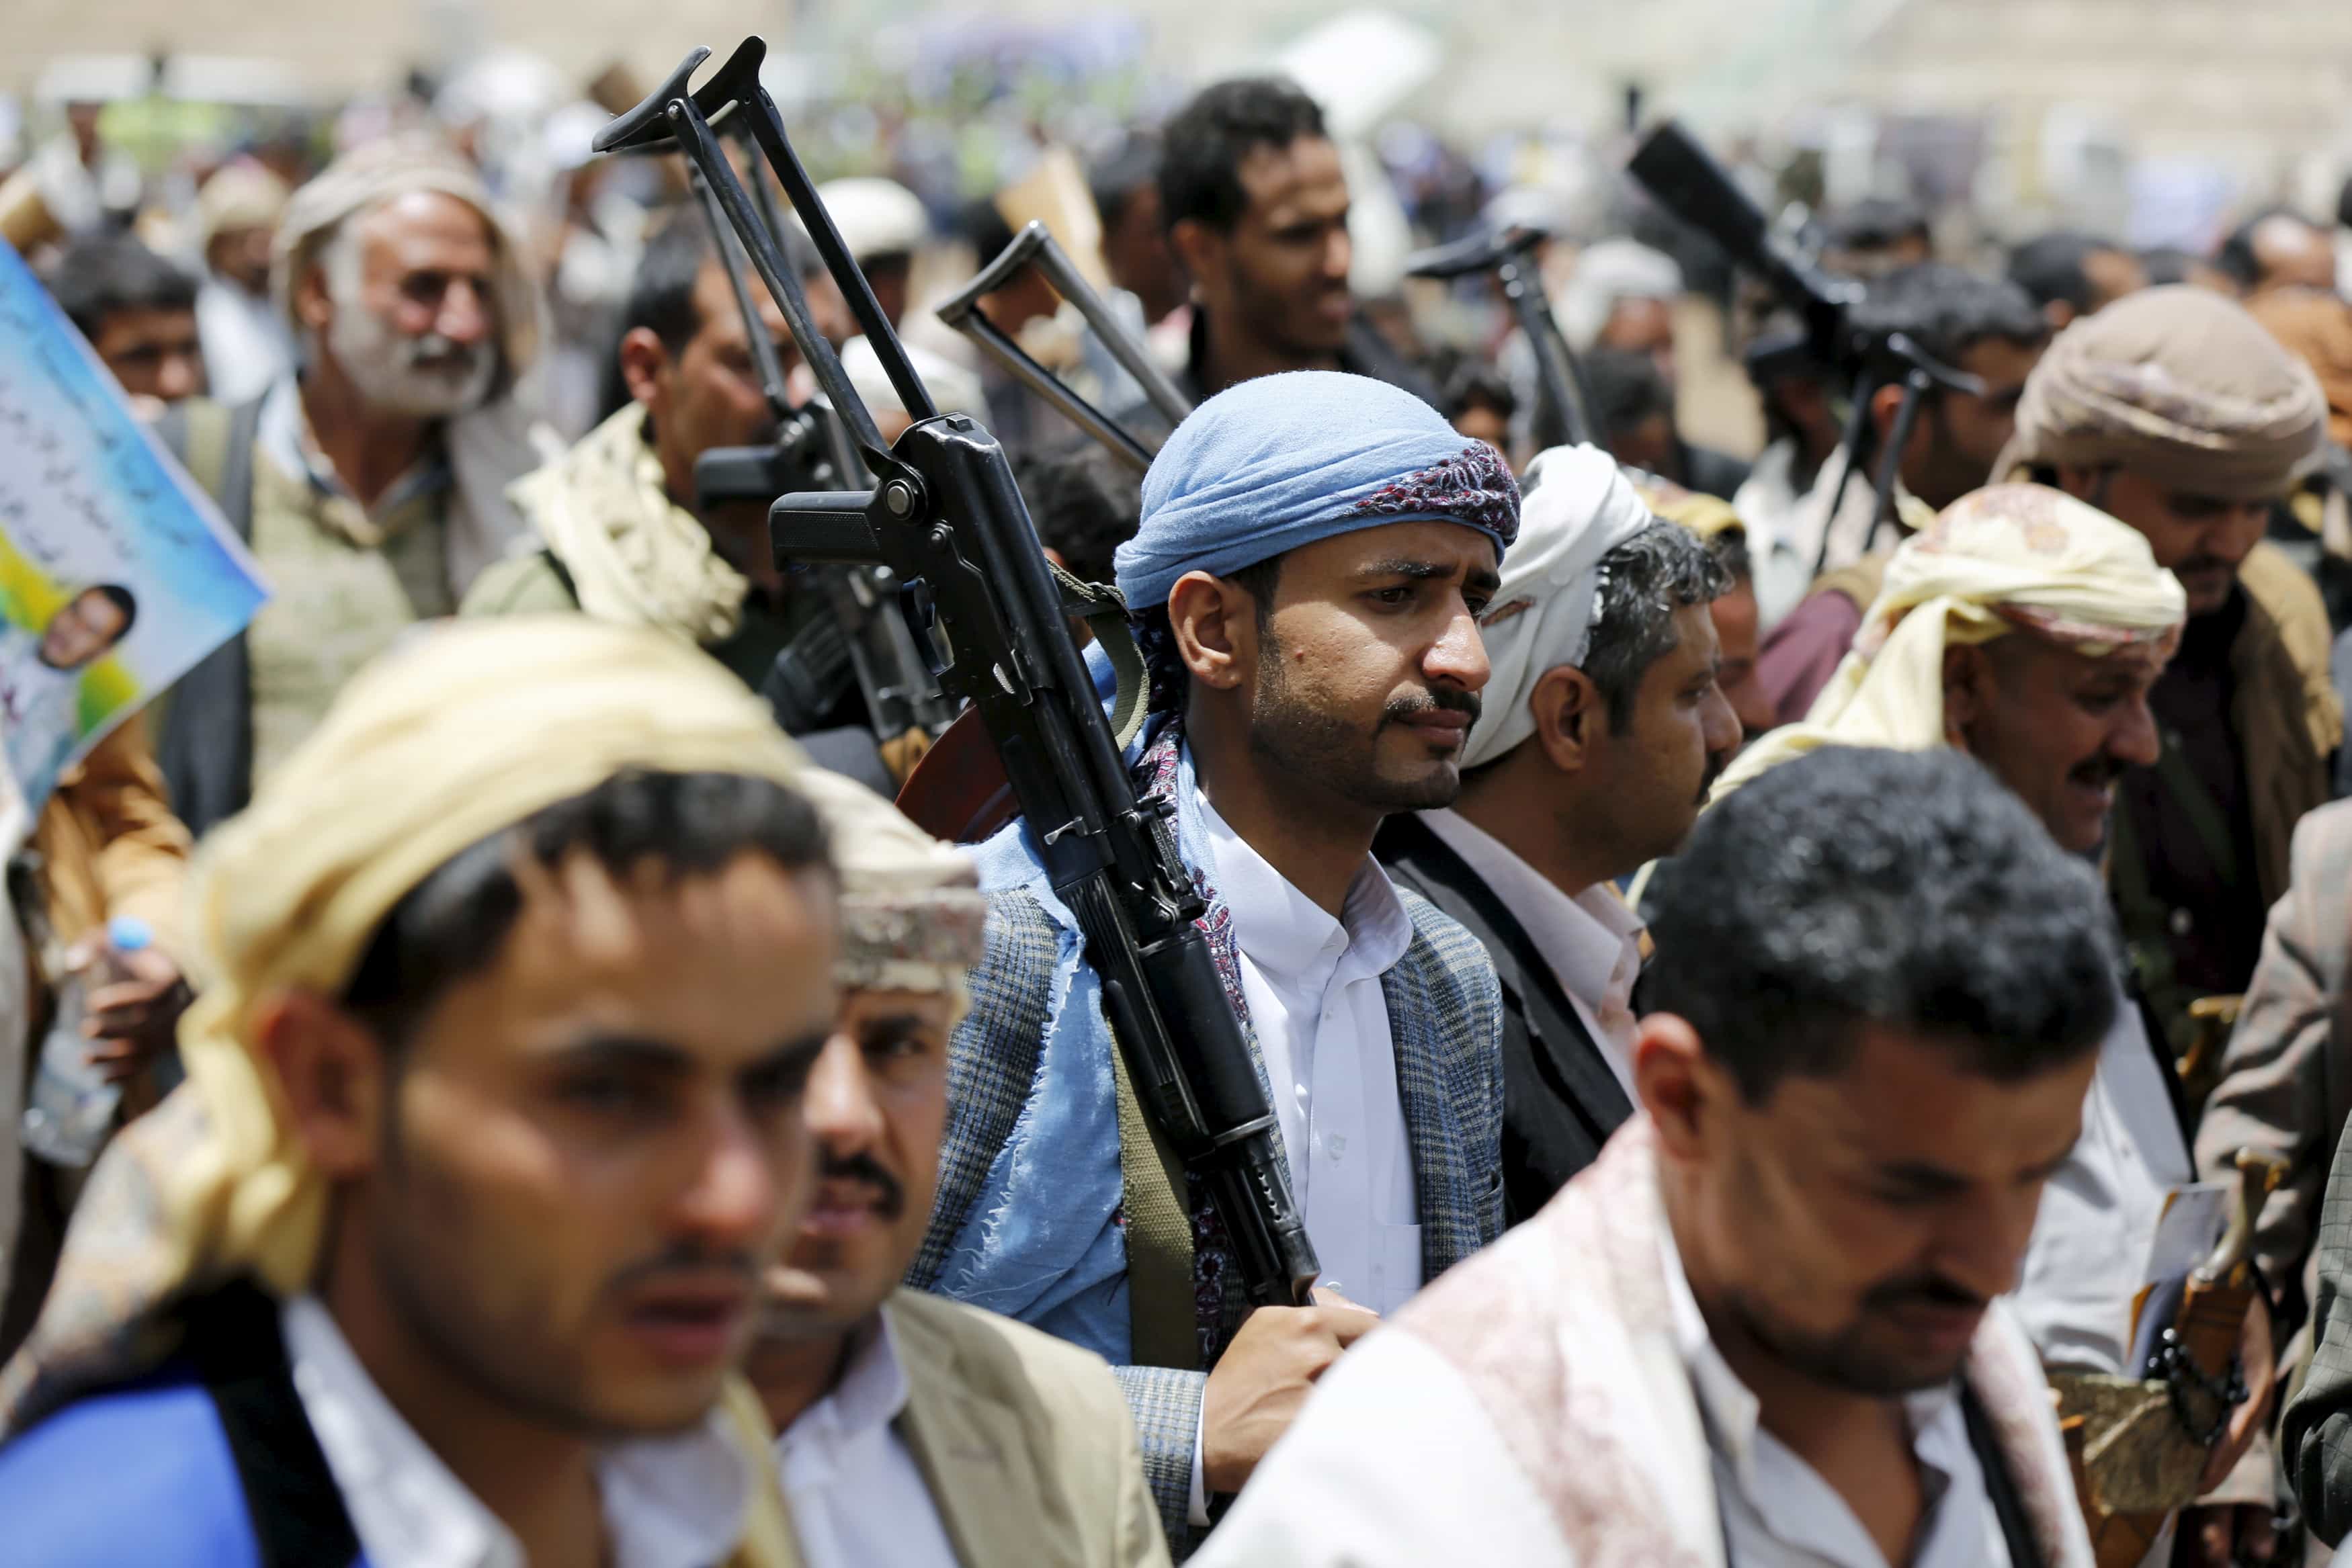 Tribesmen loyal to the Houthi movement attend a gathering in Yemen's capital Sanaa, April 17, 2016. , REUTERS/Khaled Abdullah